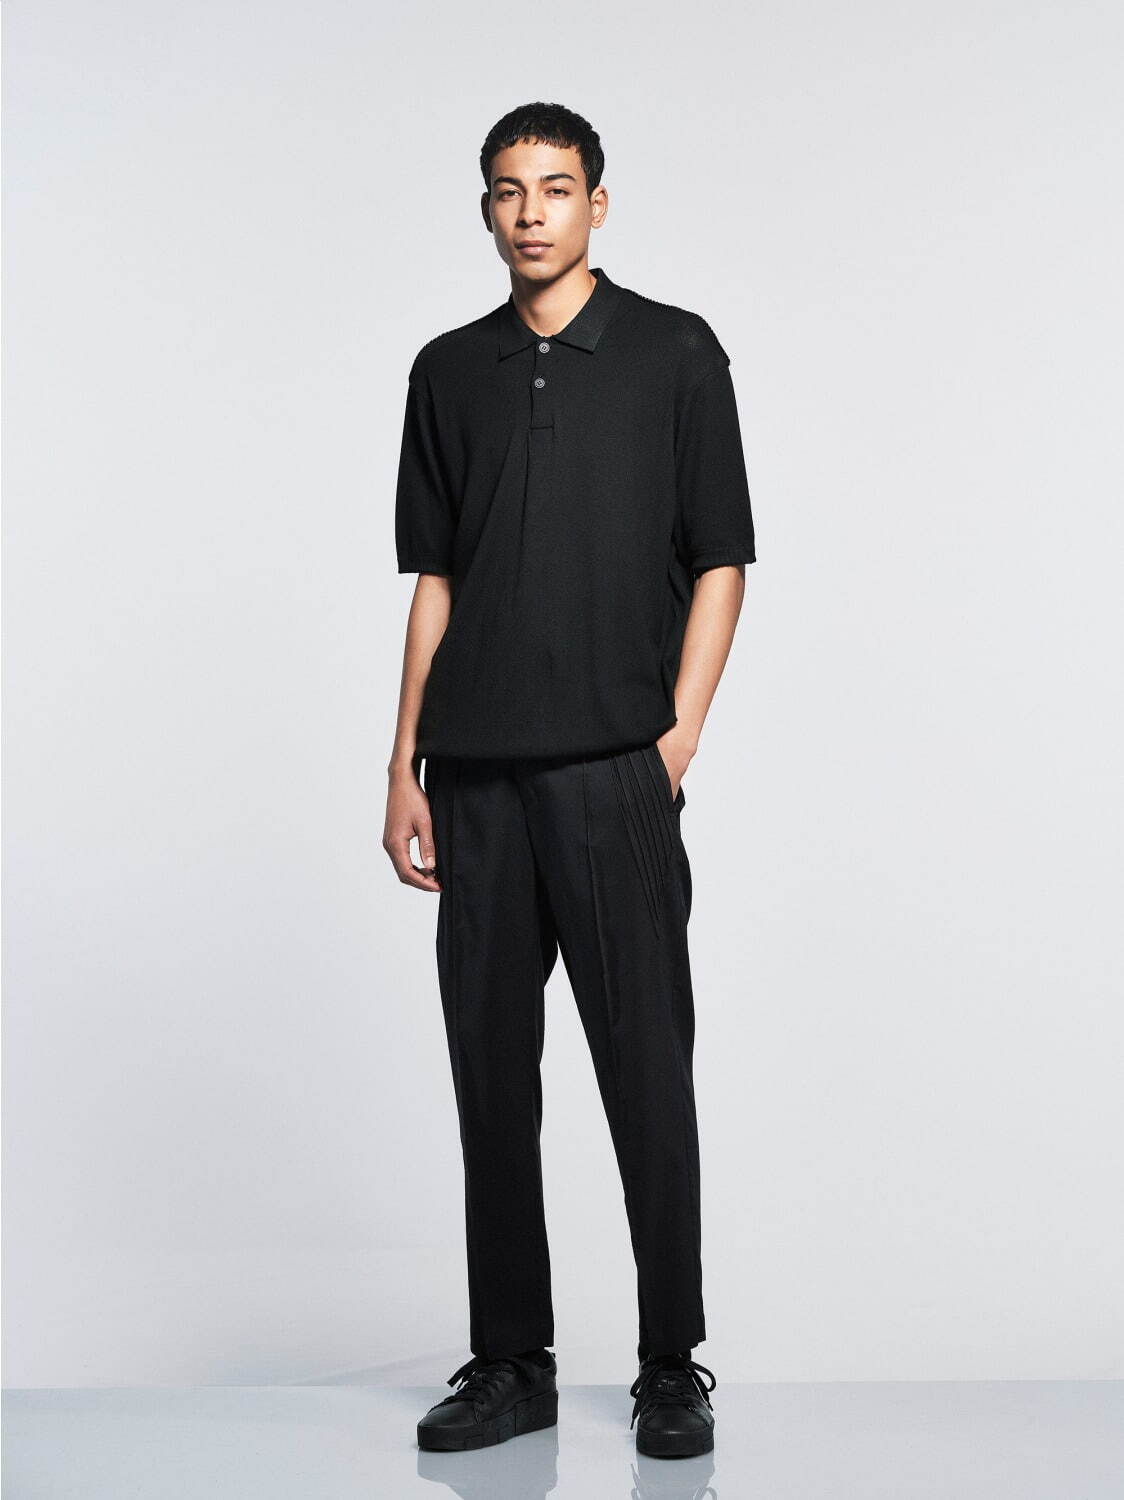 issey miyake　a-poc able type-s 001